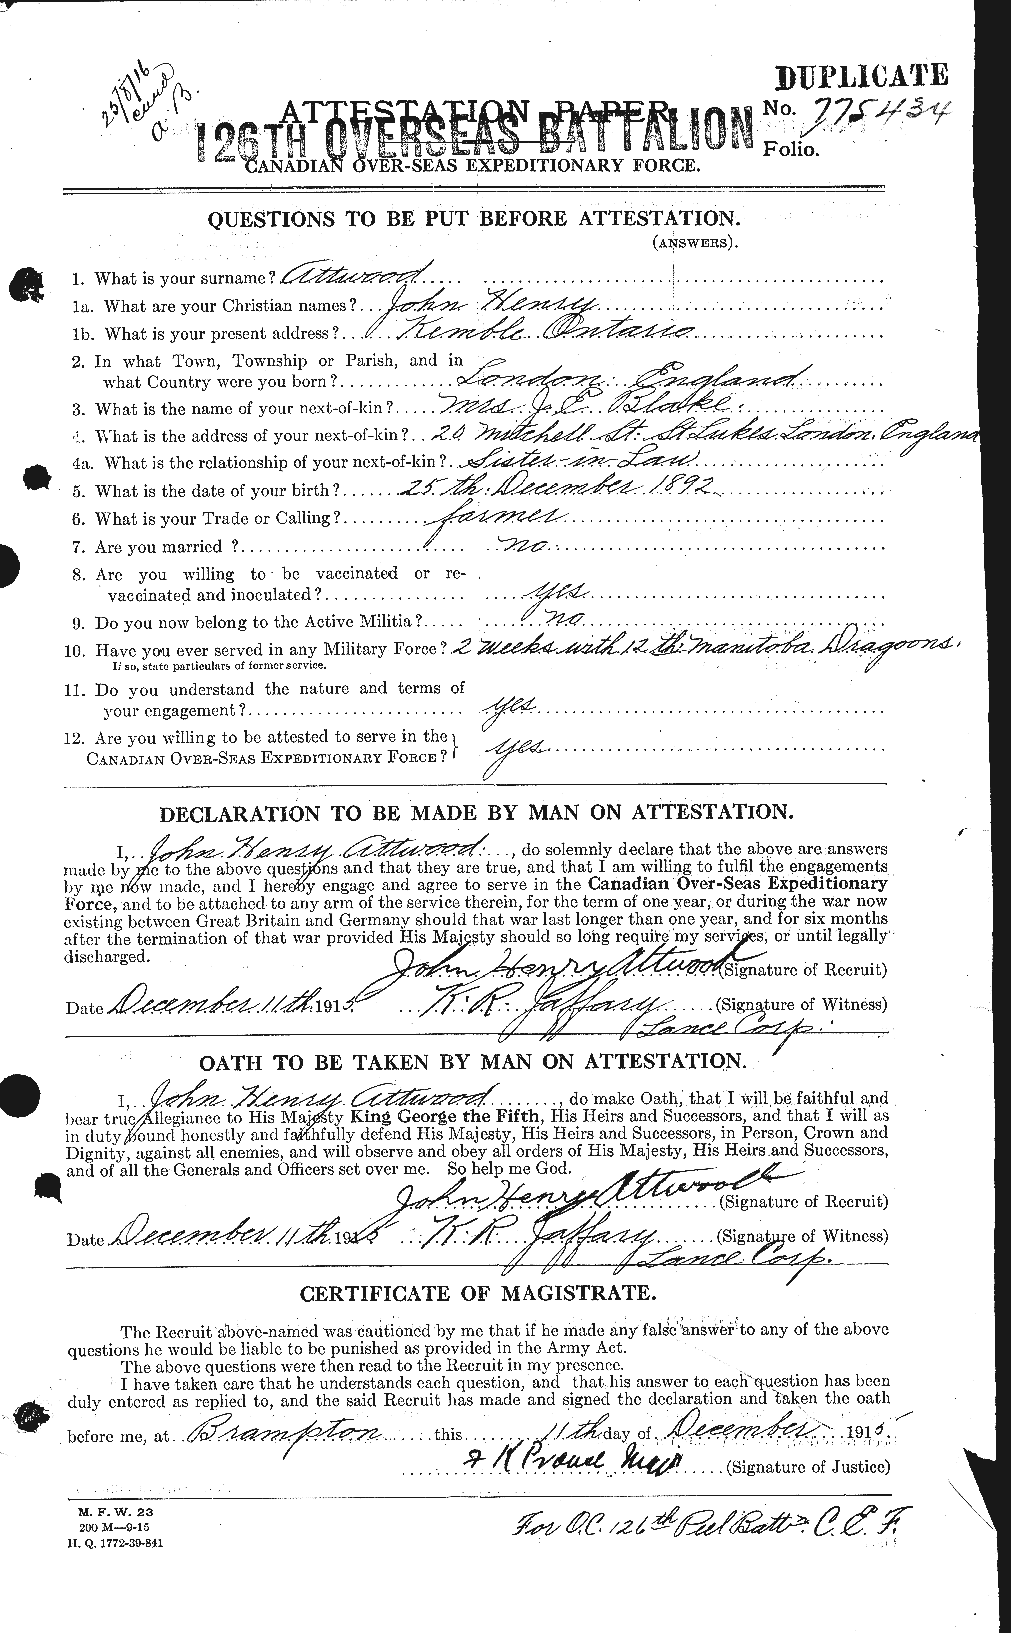 Personnel Records of the First World War - CEF 224007a